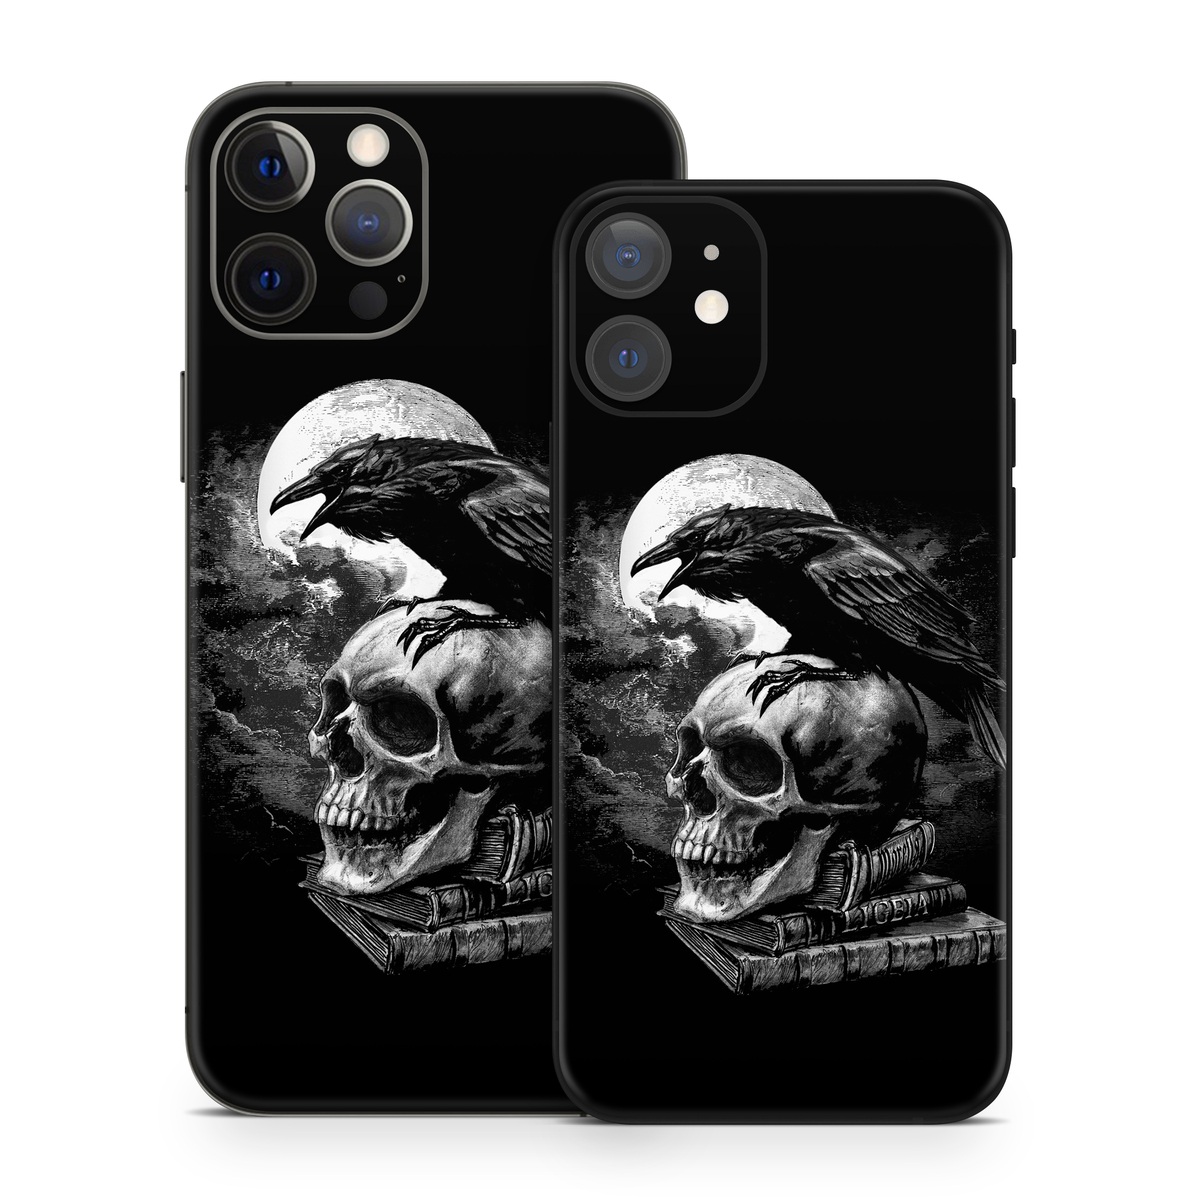 iPhone 12 Series Skin design of Bone, Skull, Bird, Darkness, Monochrome, Wing, Black-and-white, Illustration, Beak, Fictional Character, Drawing, Symbol, with black, white, gray colors